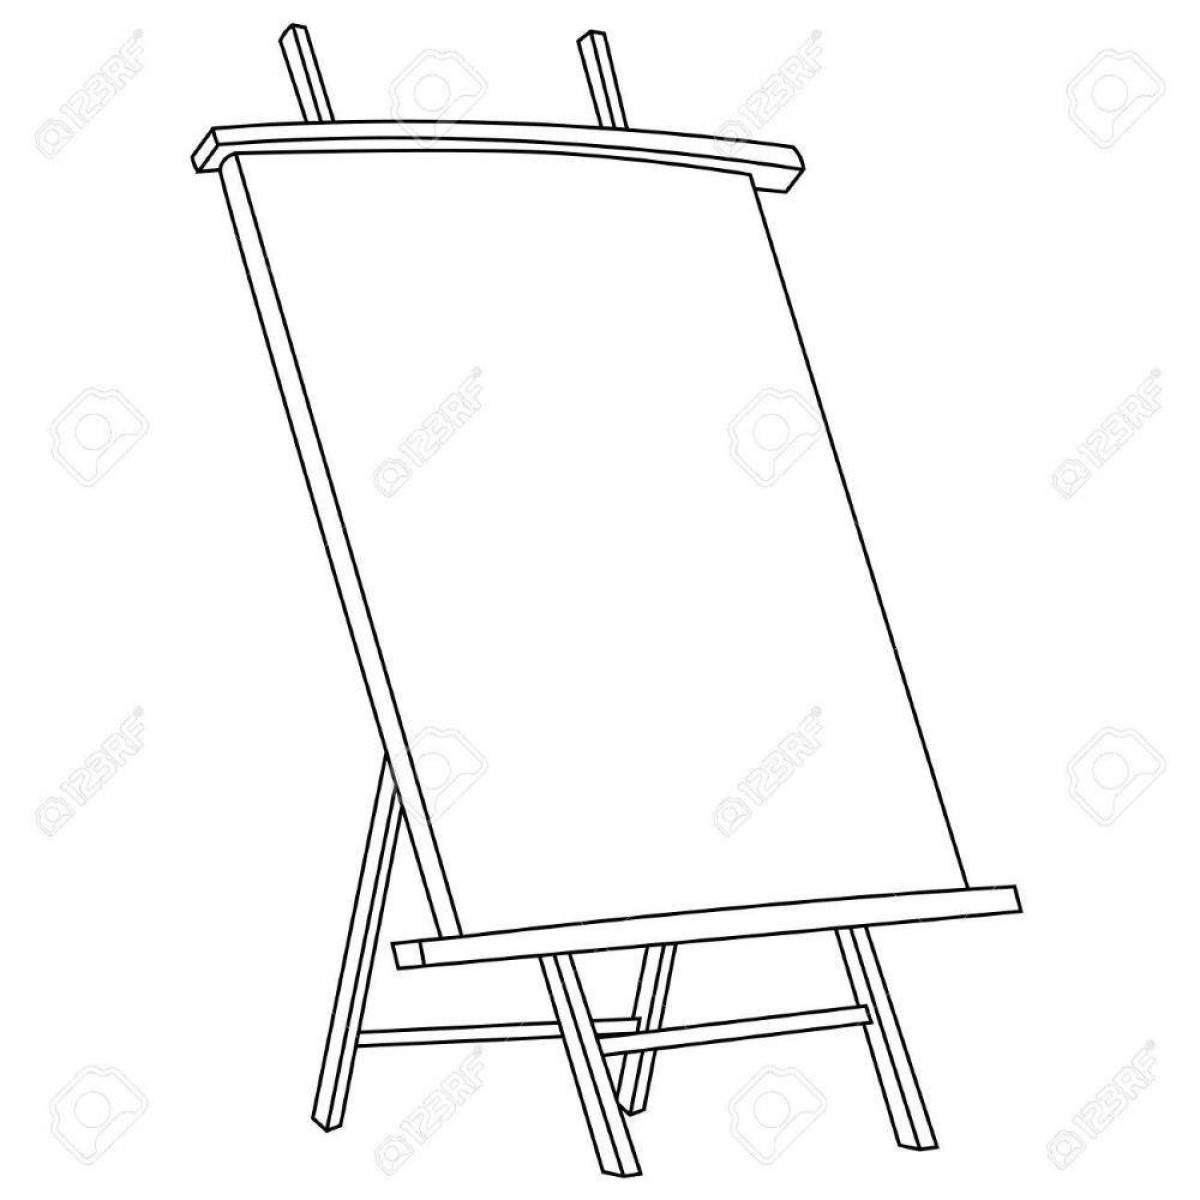 Innovative coloring easel